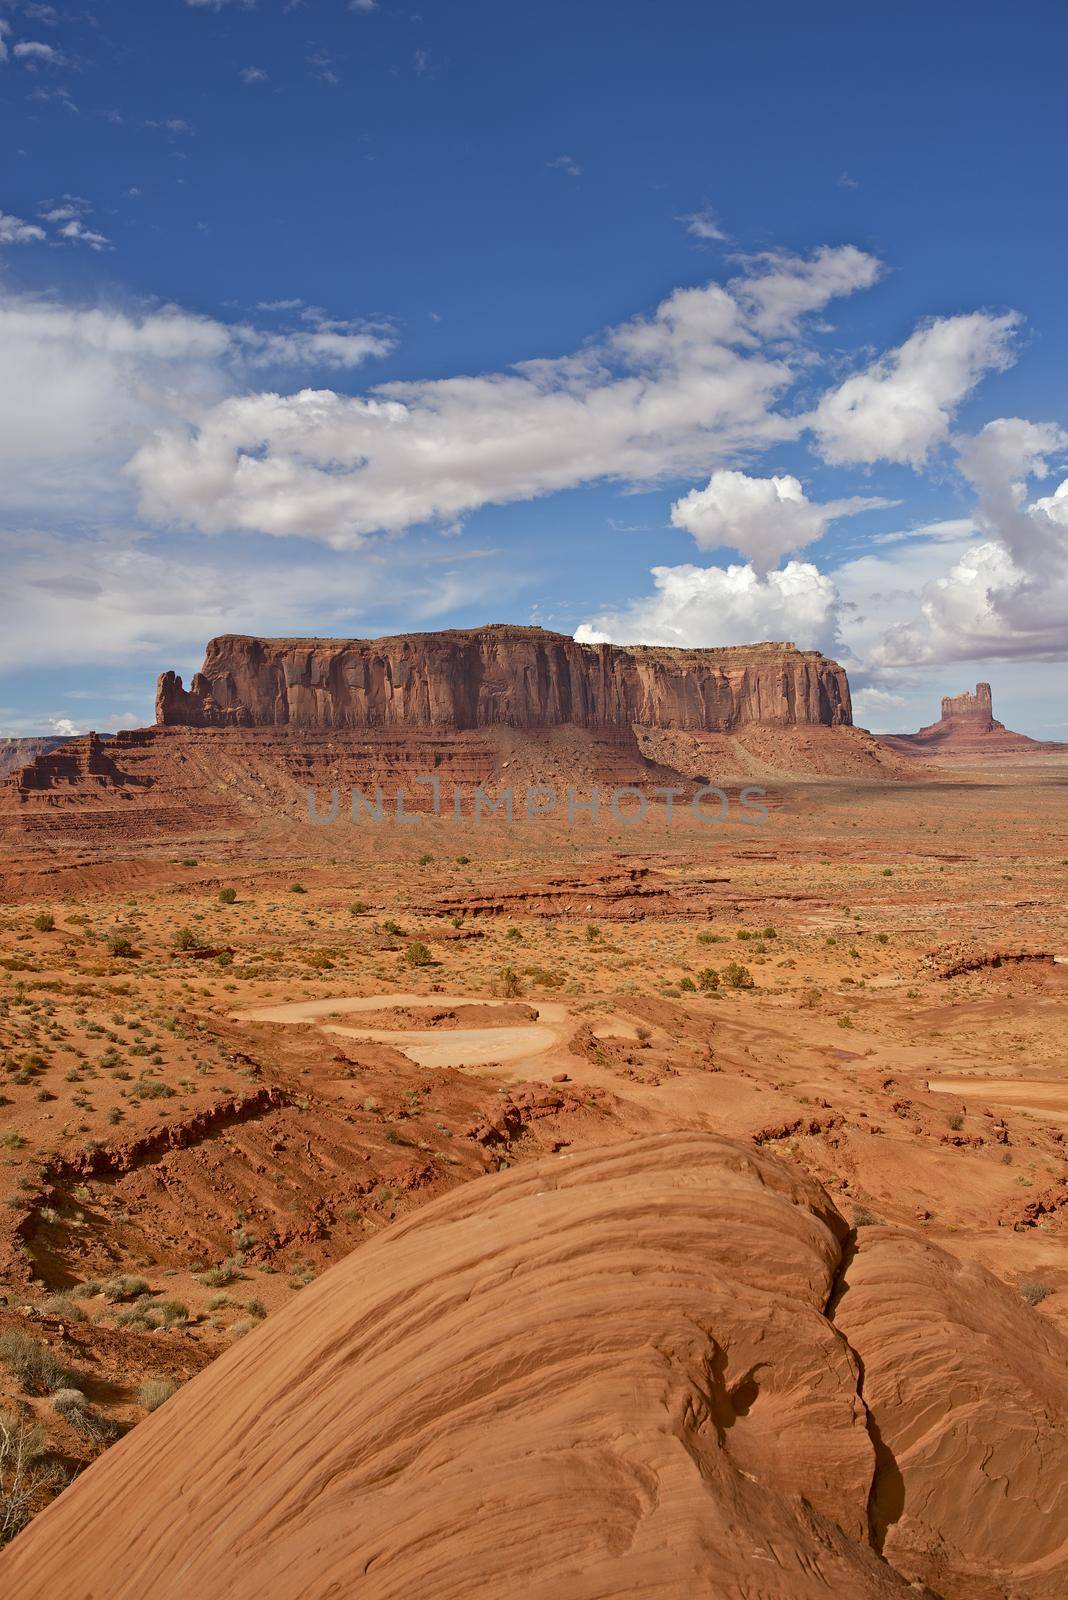 Arizona Desert Landscape and Monuments Valley. Nature Photo Collection.